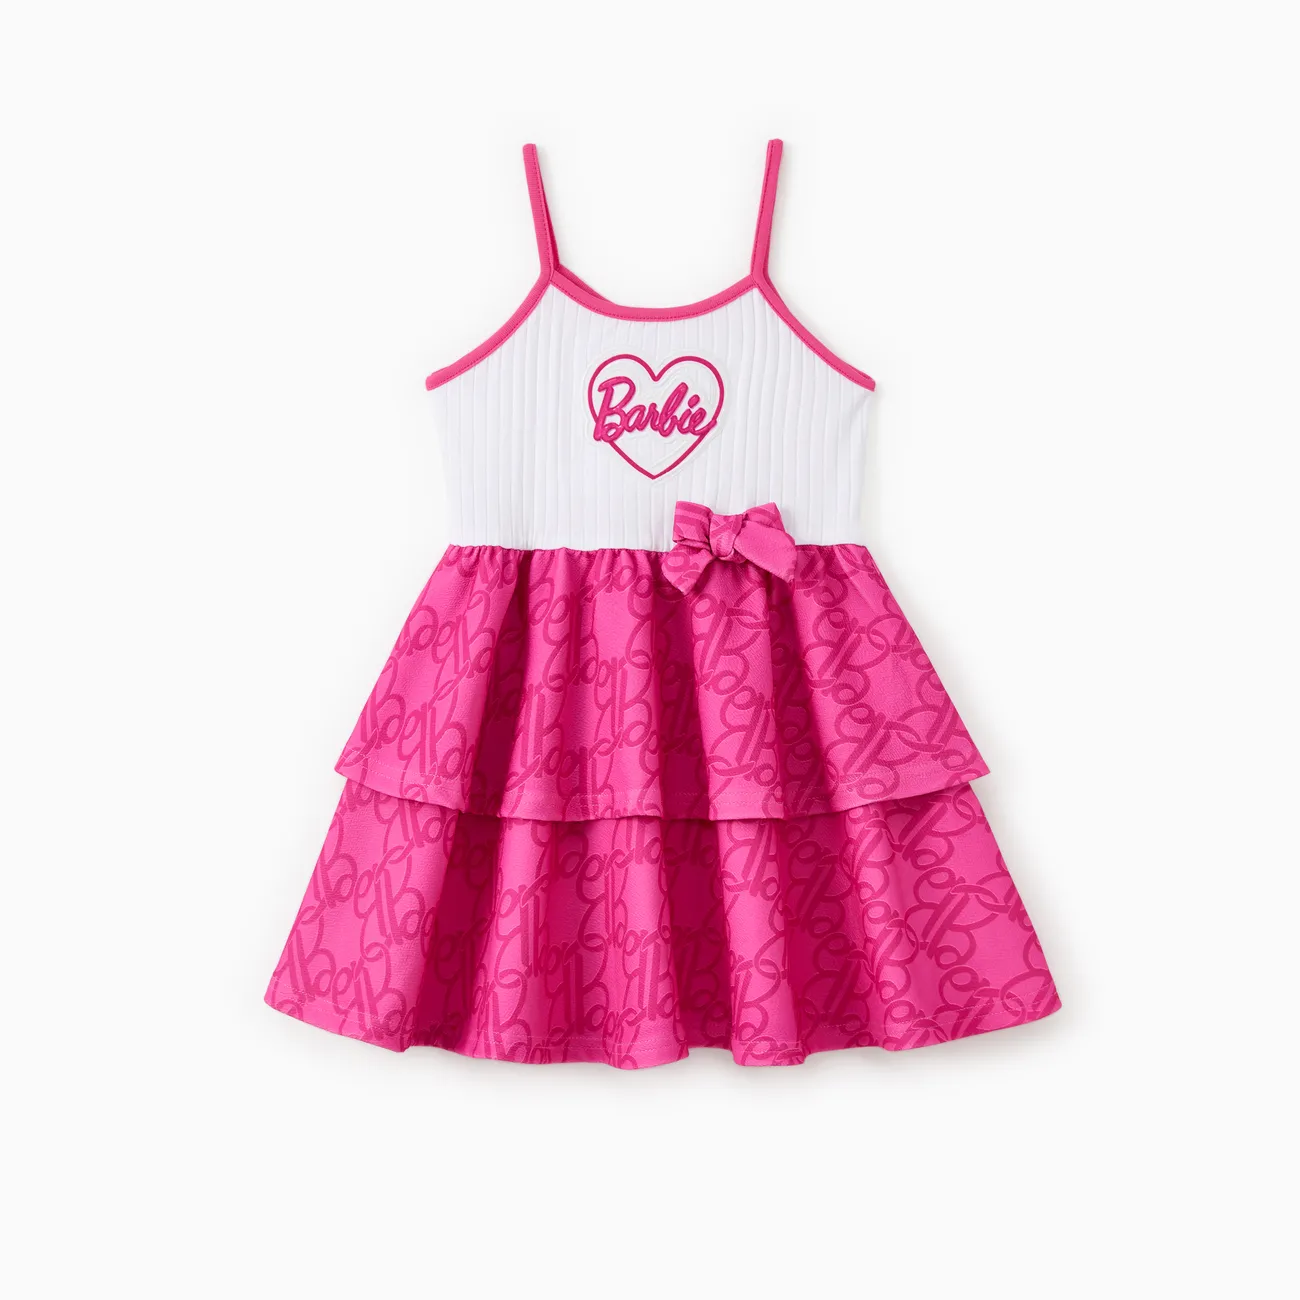 Barbie Mommy and Me Classic Letter Print Cotton Ruffle Bowknot Dress PinkyWhite big image 1